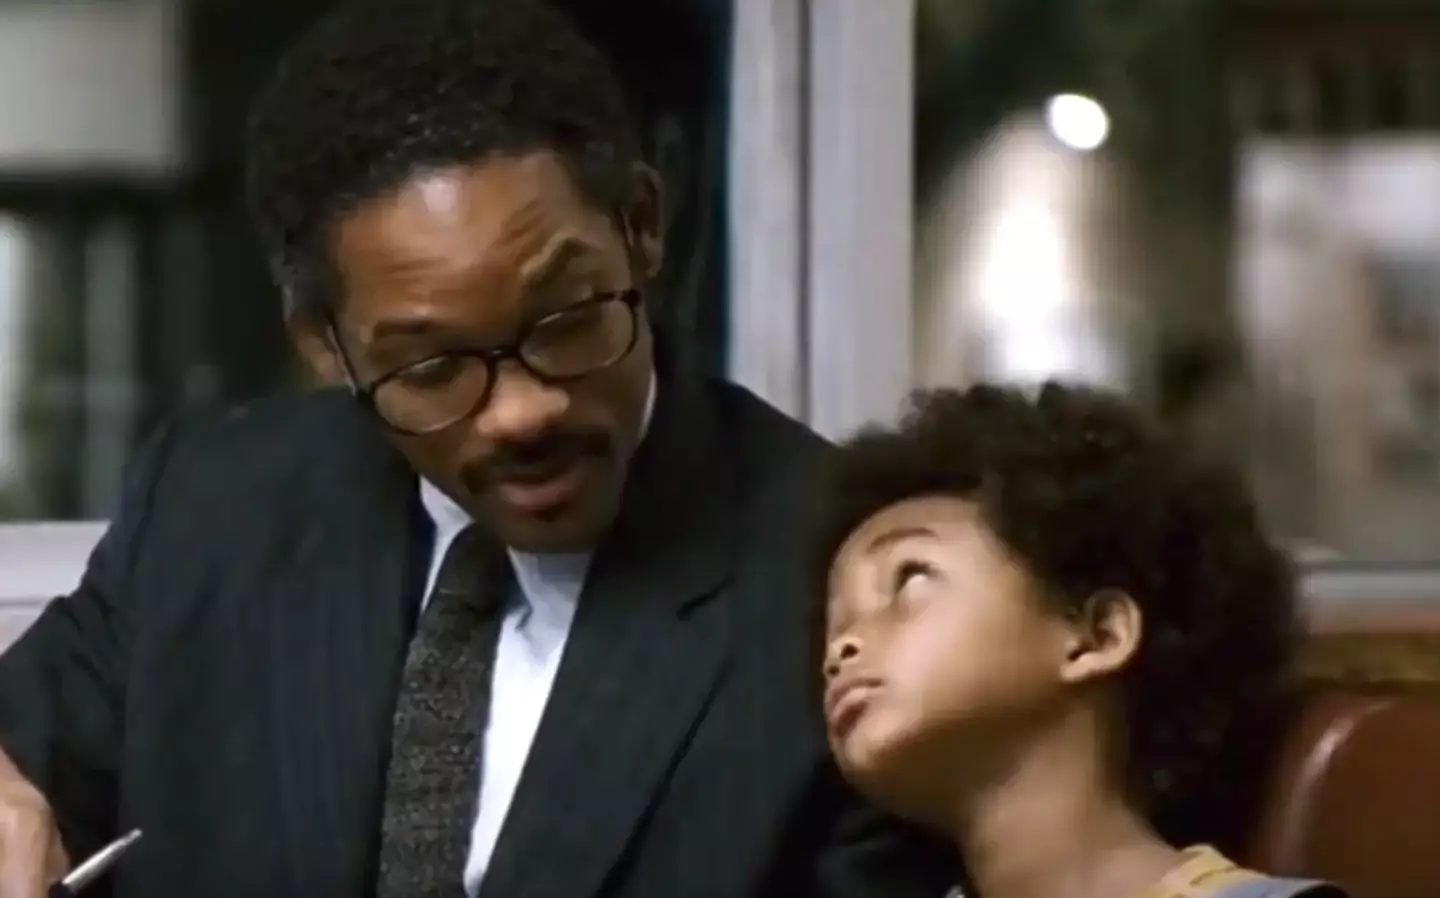 Will and Jaden Smith in The Pursuit of Happyness.